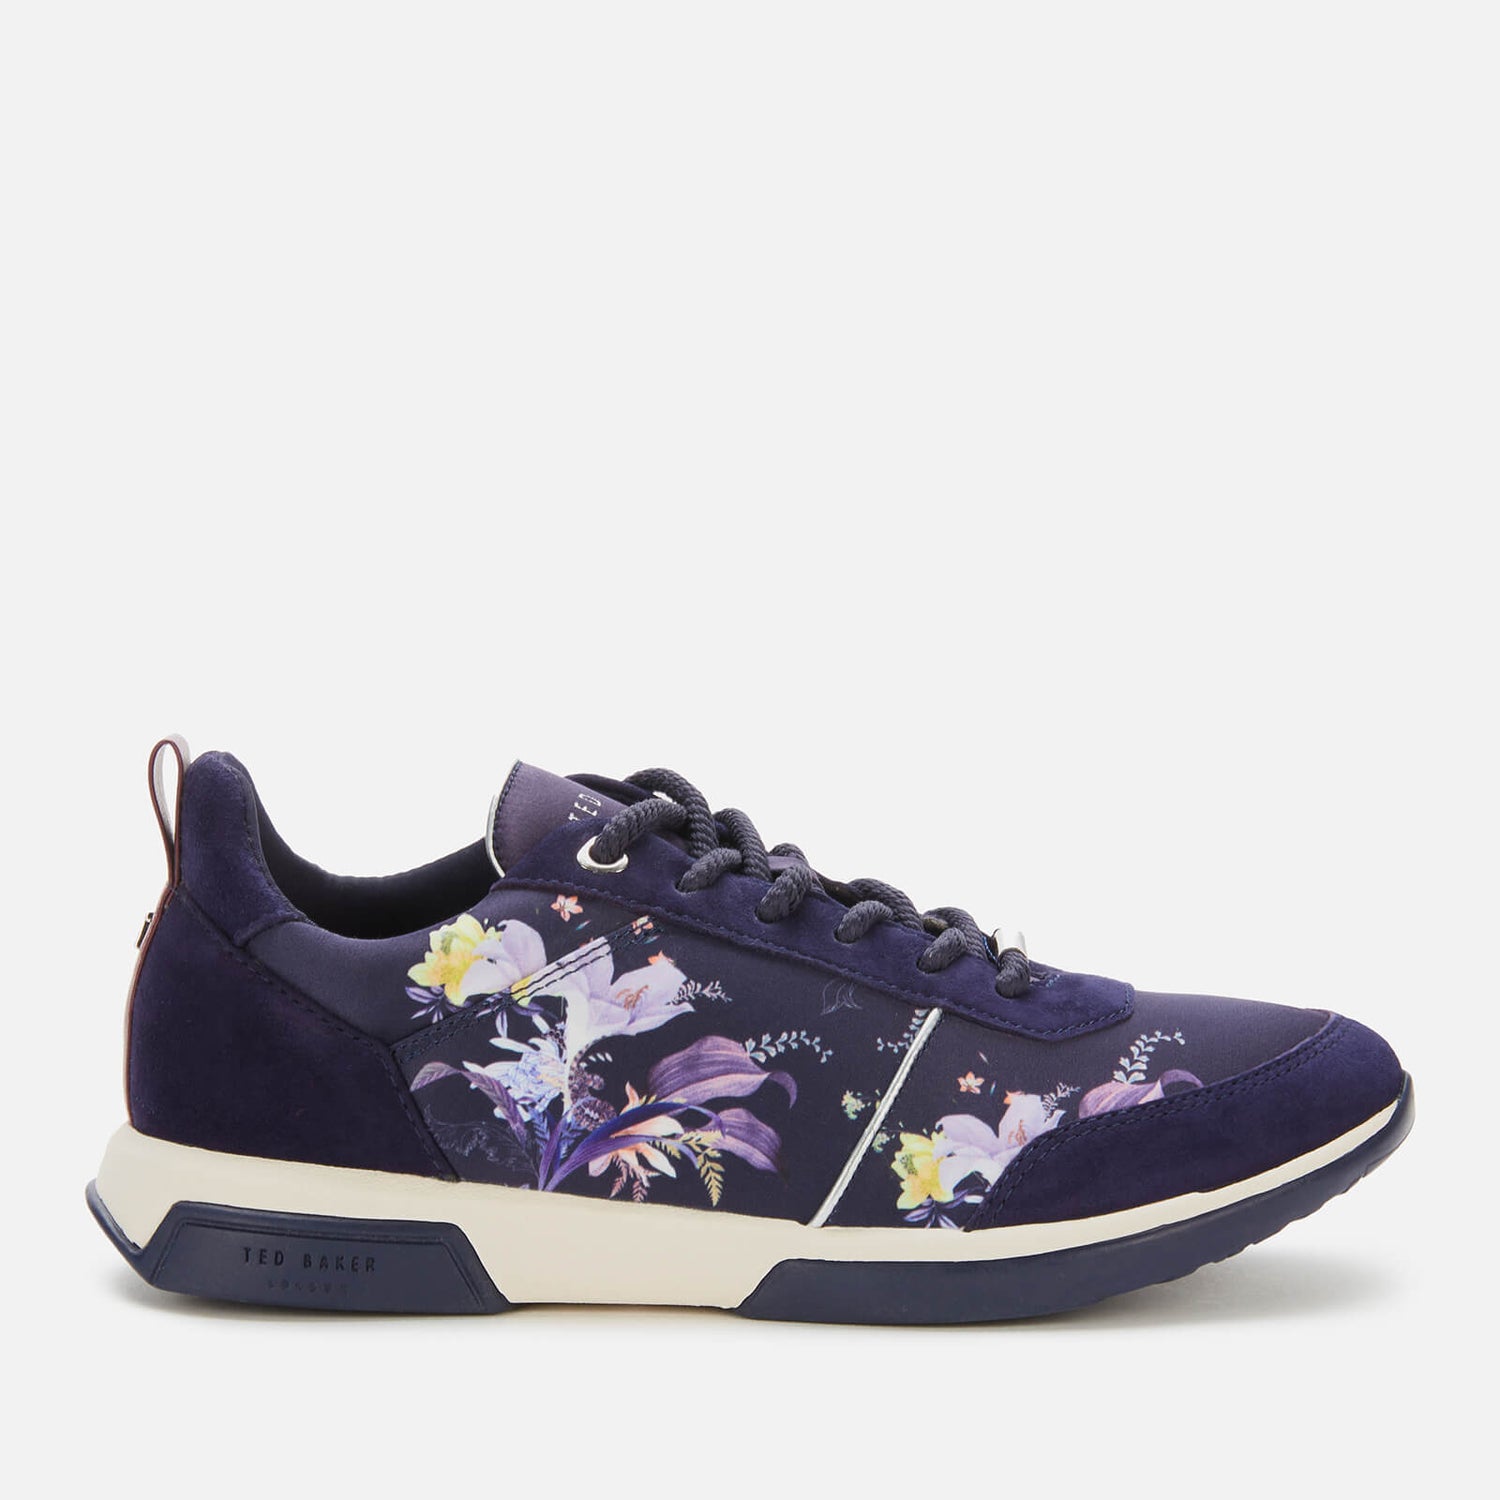 Ted Baker Women's Ceyyas Running Style Trainers - Navy